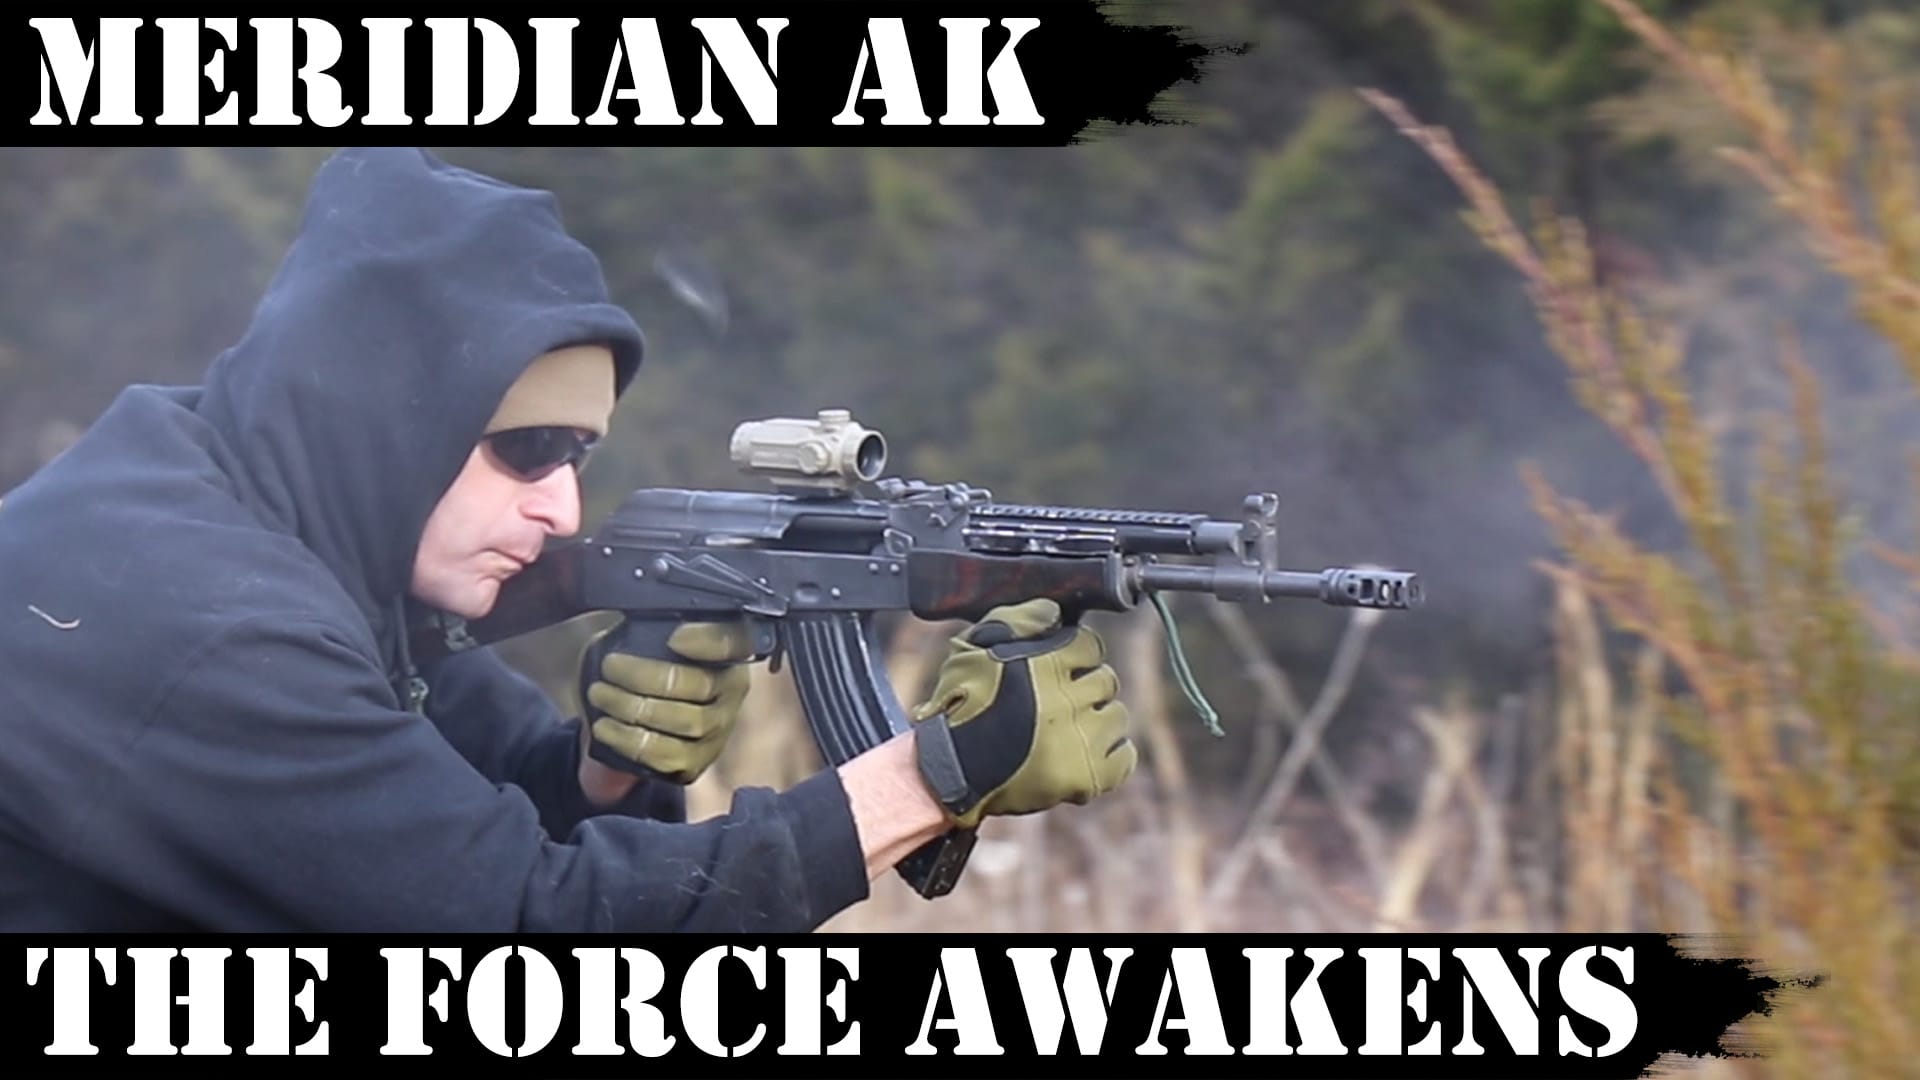 Meridian AK: The Force Awakens – 4,000 Rds in Sand!